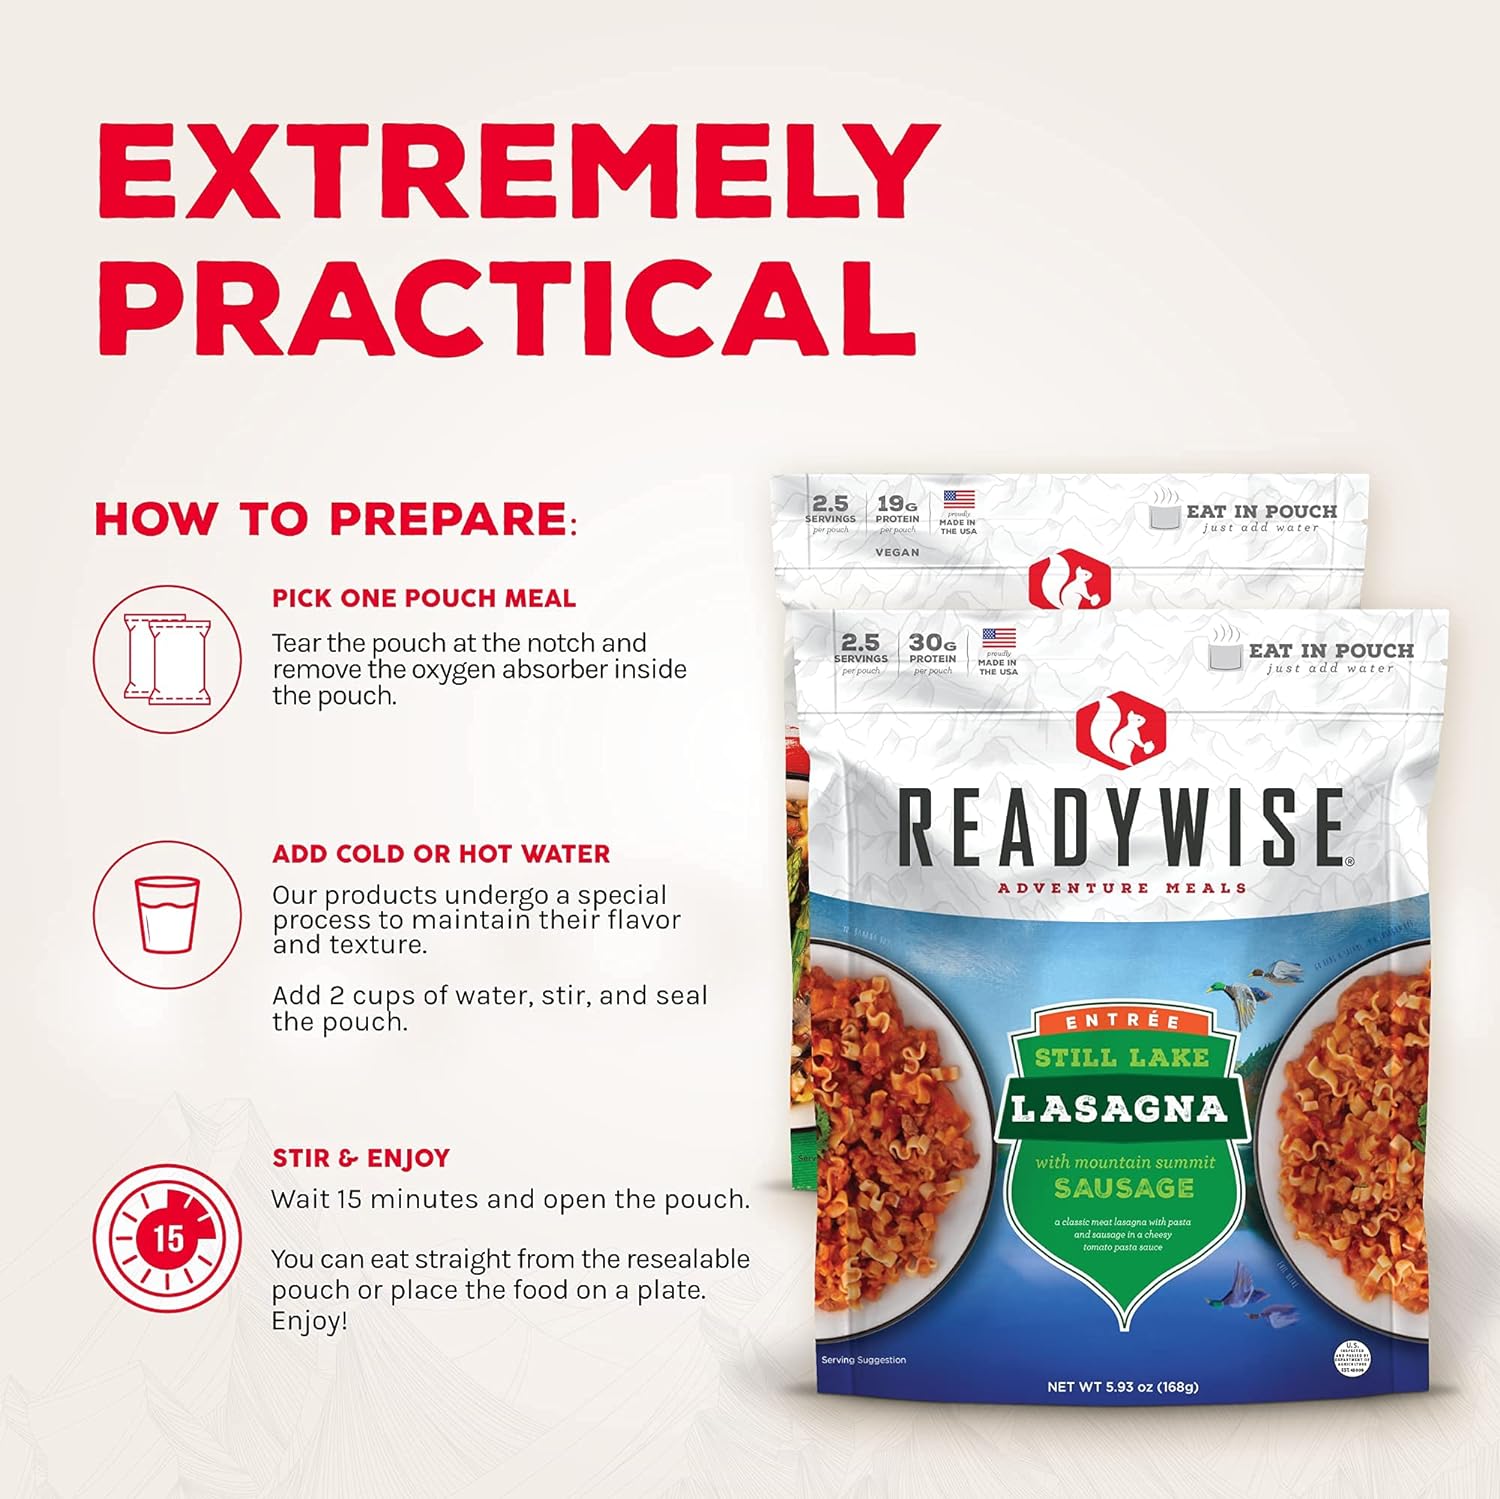 ReadyWise Adventure Meals Favorites Kit - For Emergency Food Supply and Outdoor Adventures